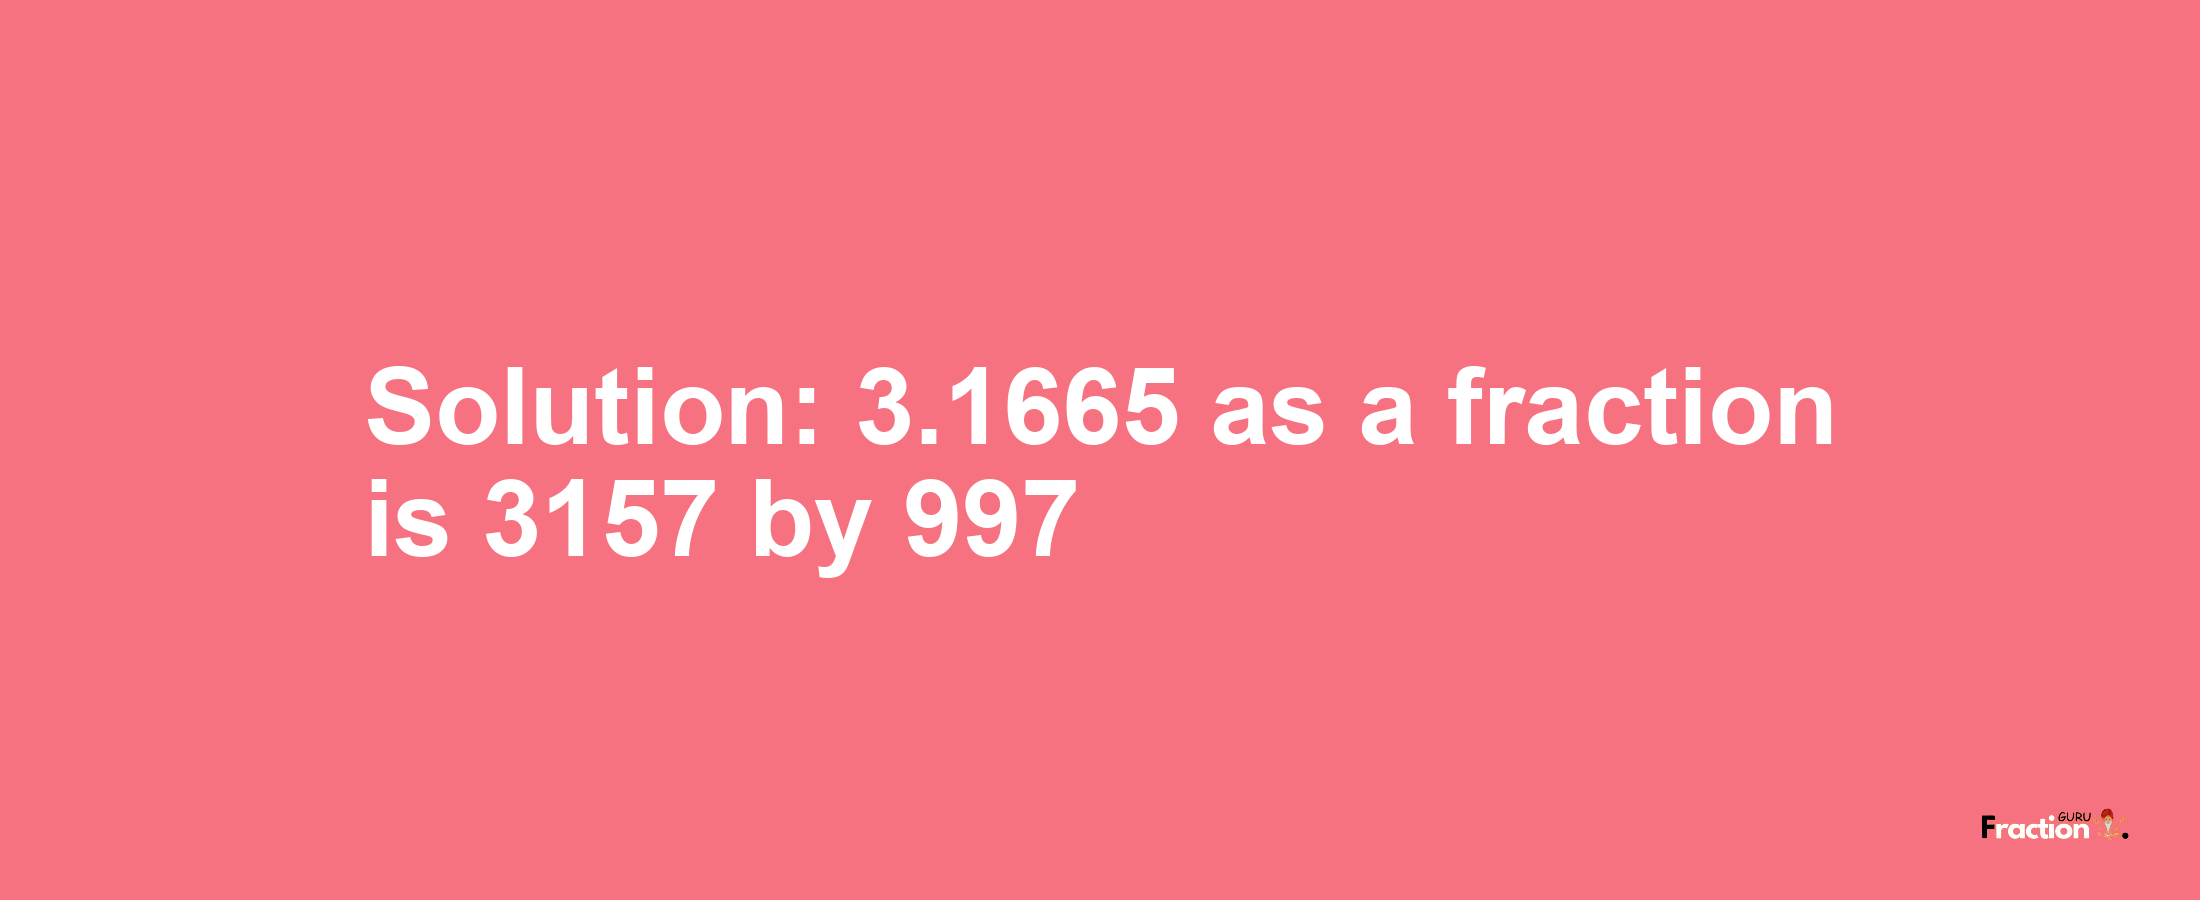 Solution:3.1665 as a fraction is 3157/997